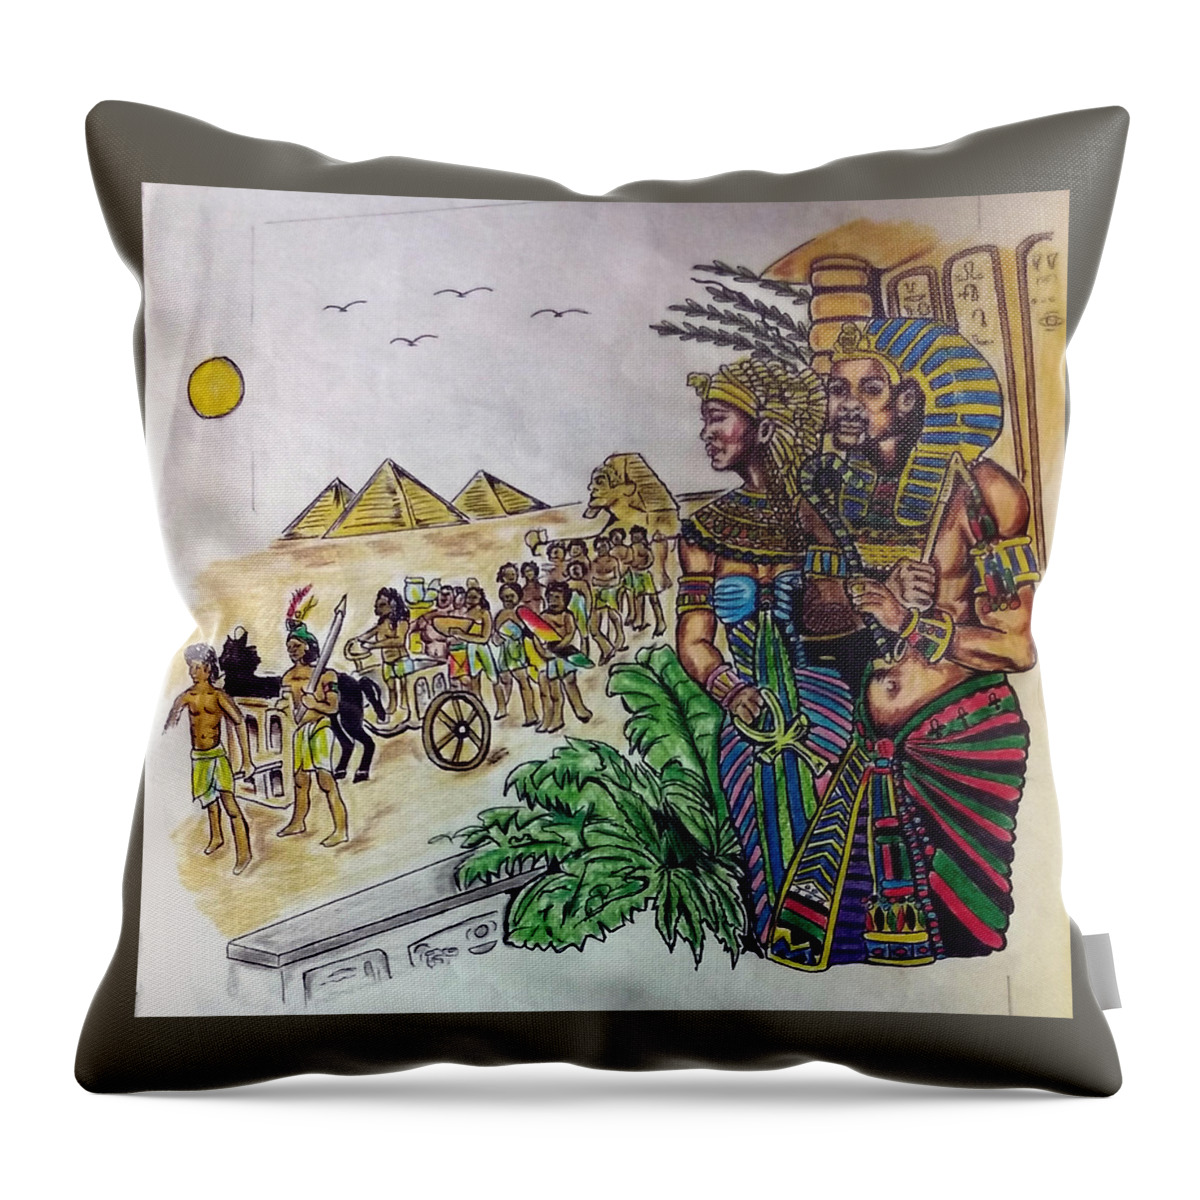 Black Art Throw Pillow featuring the drawing Untitled by Joedee